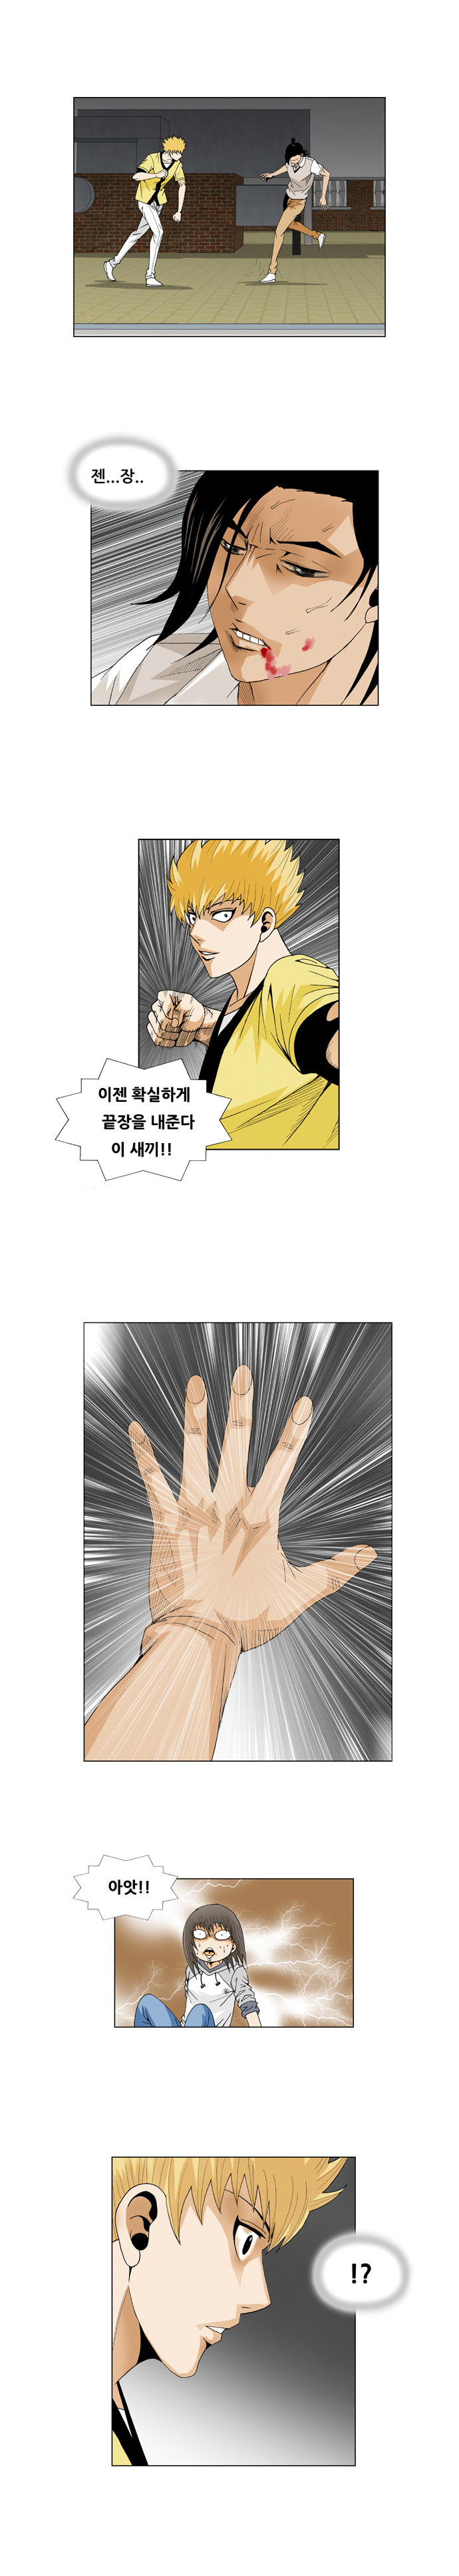 Ultimate Legend - Kang Hae Hyo - Chapter 36 - Page 14